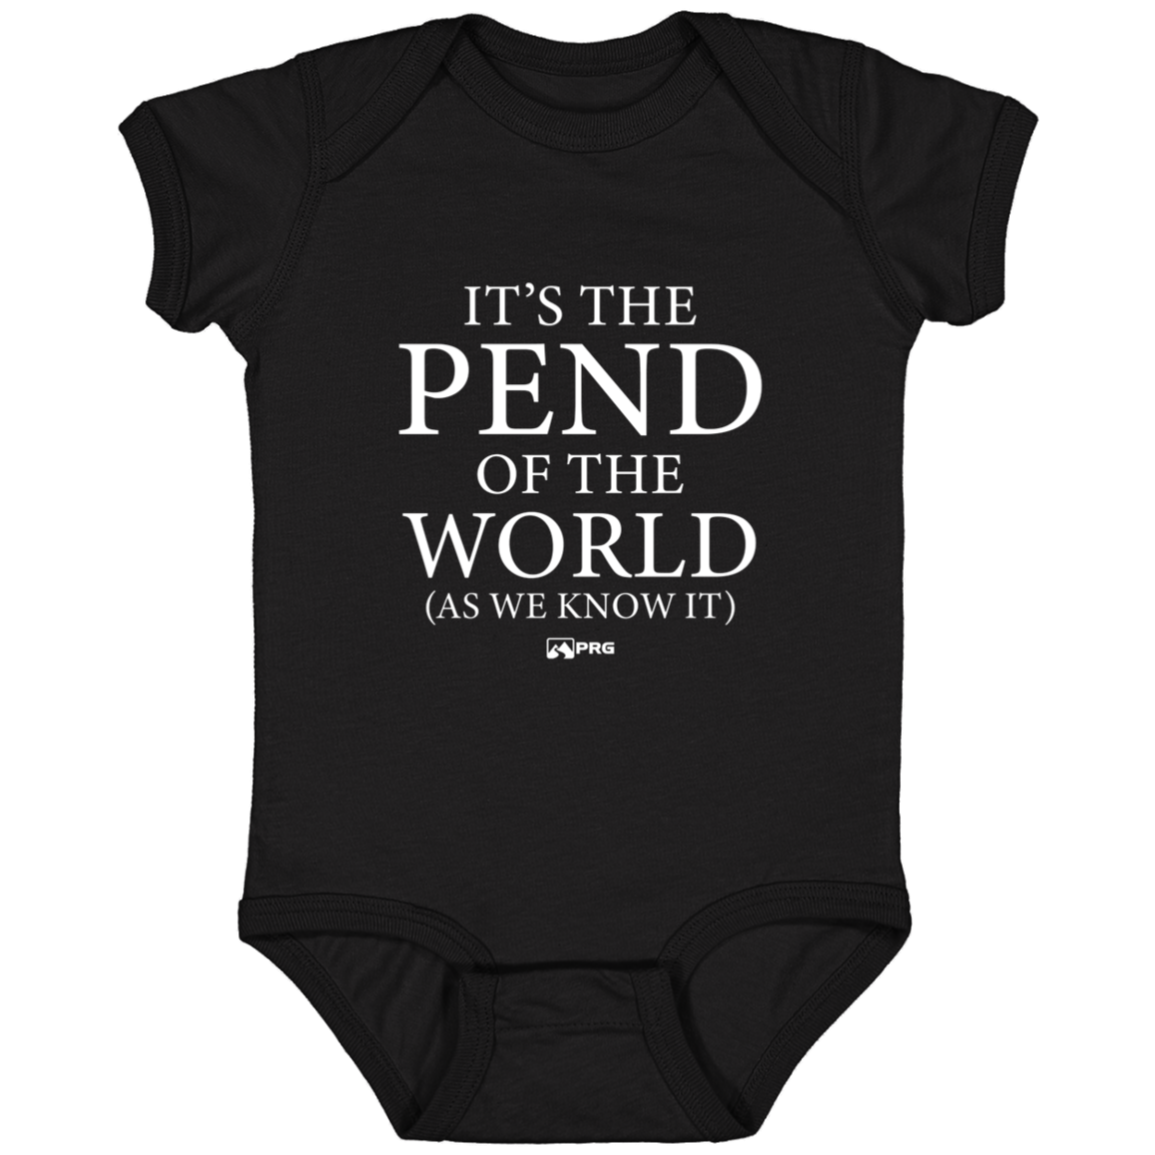 Pend of the World - Infant Onesie